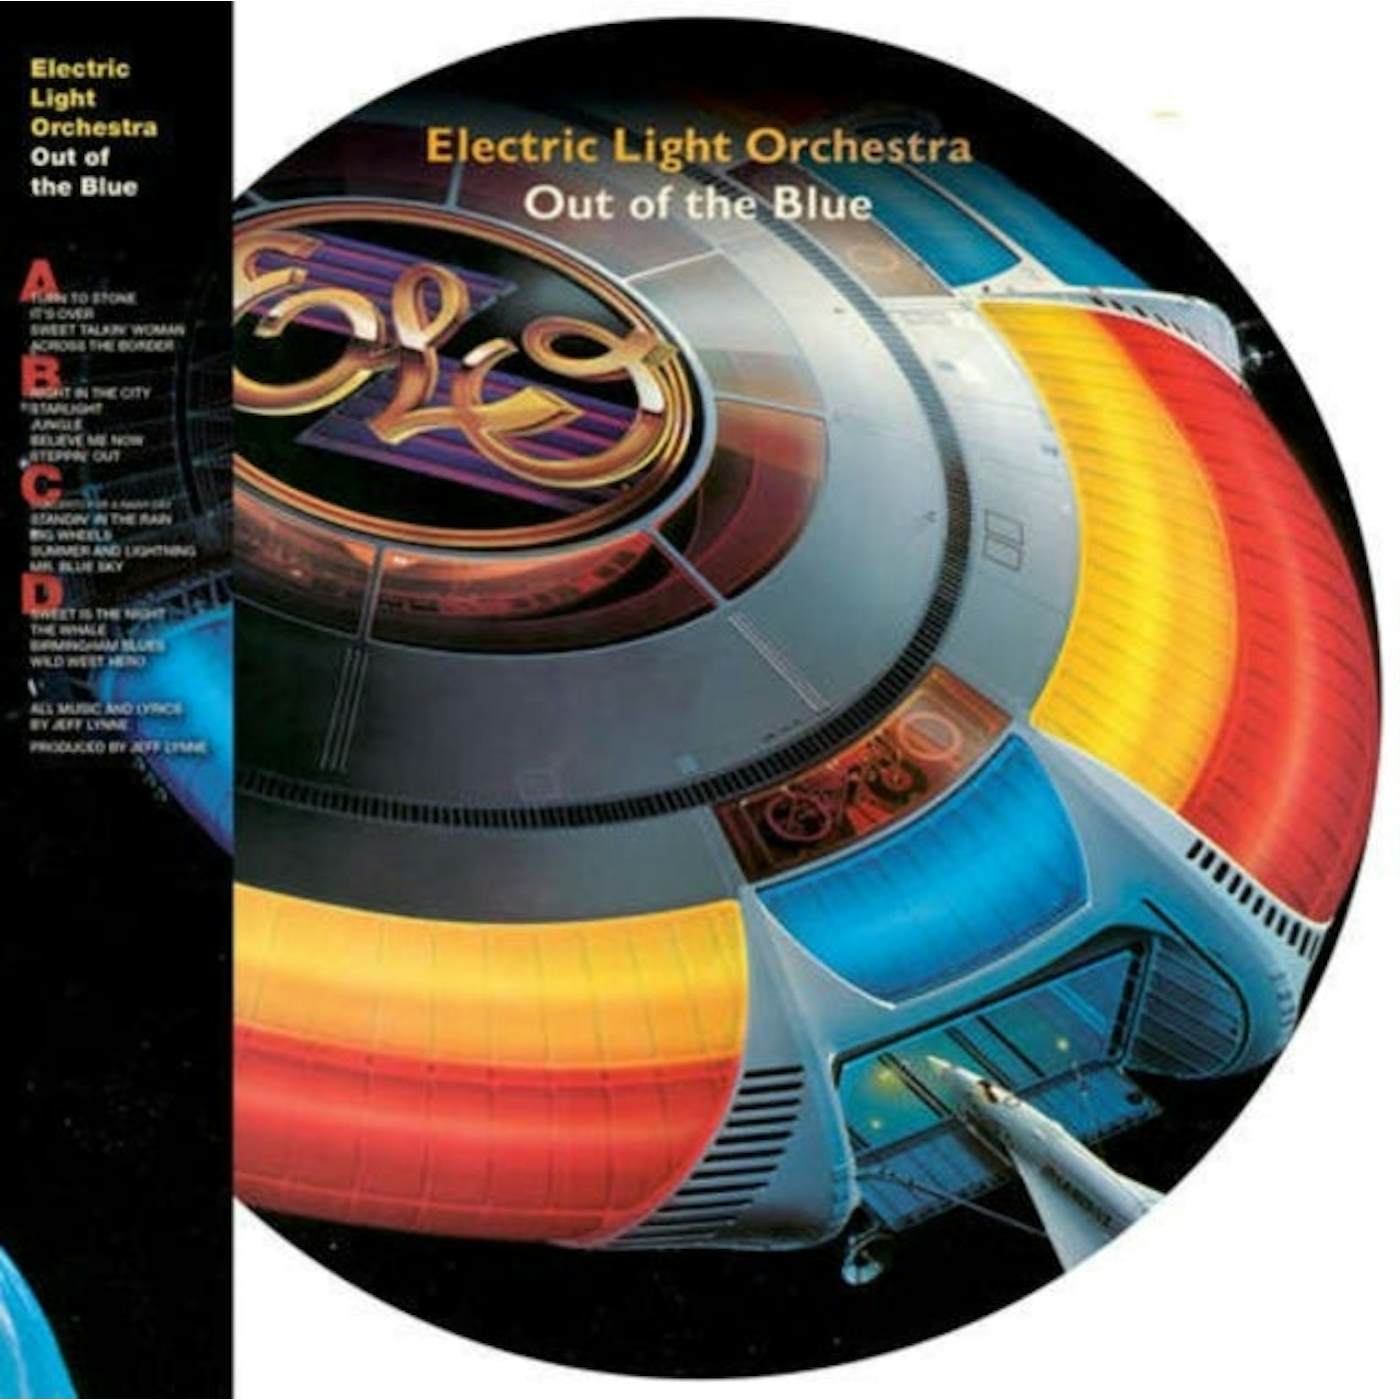 ELO (Electric Light Orchestra) LP Vinyl Record - Out Of The Blue